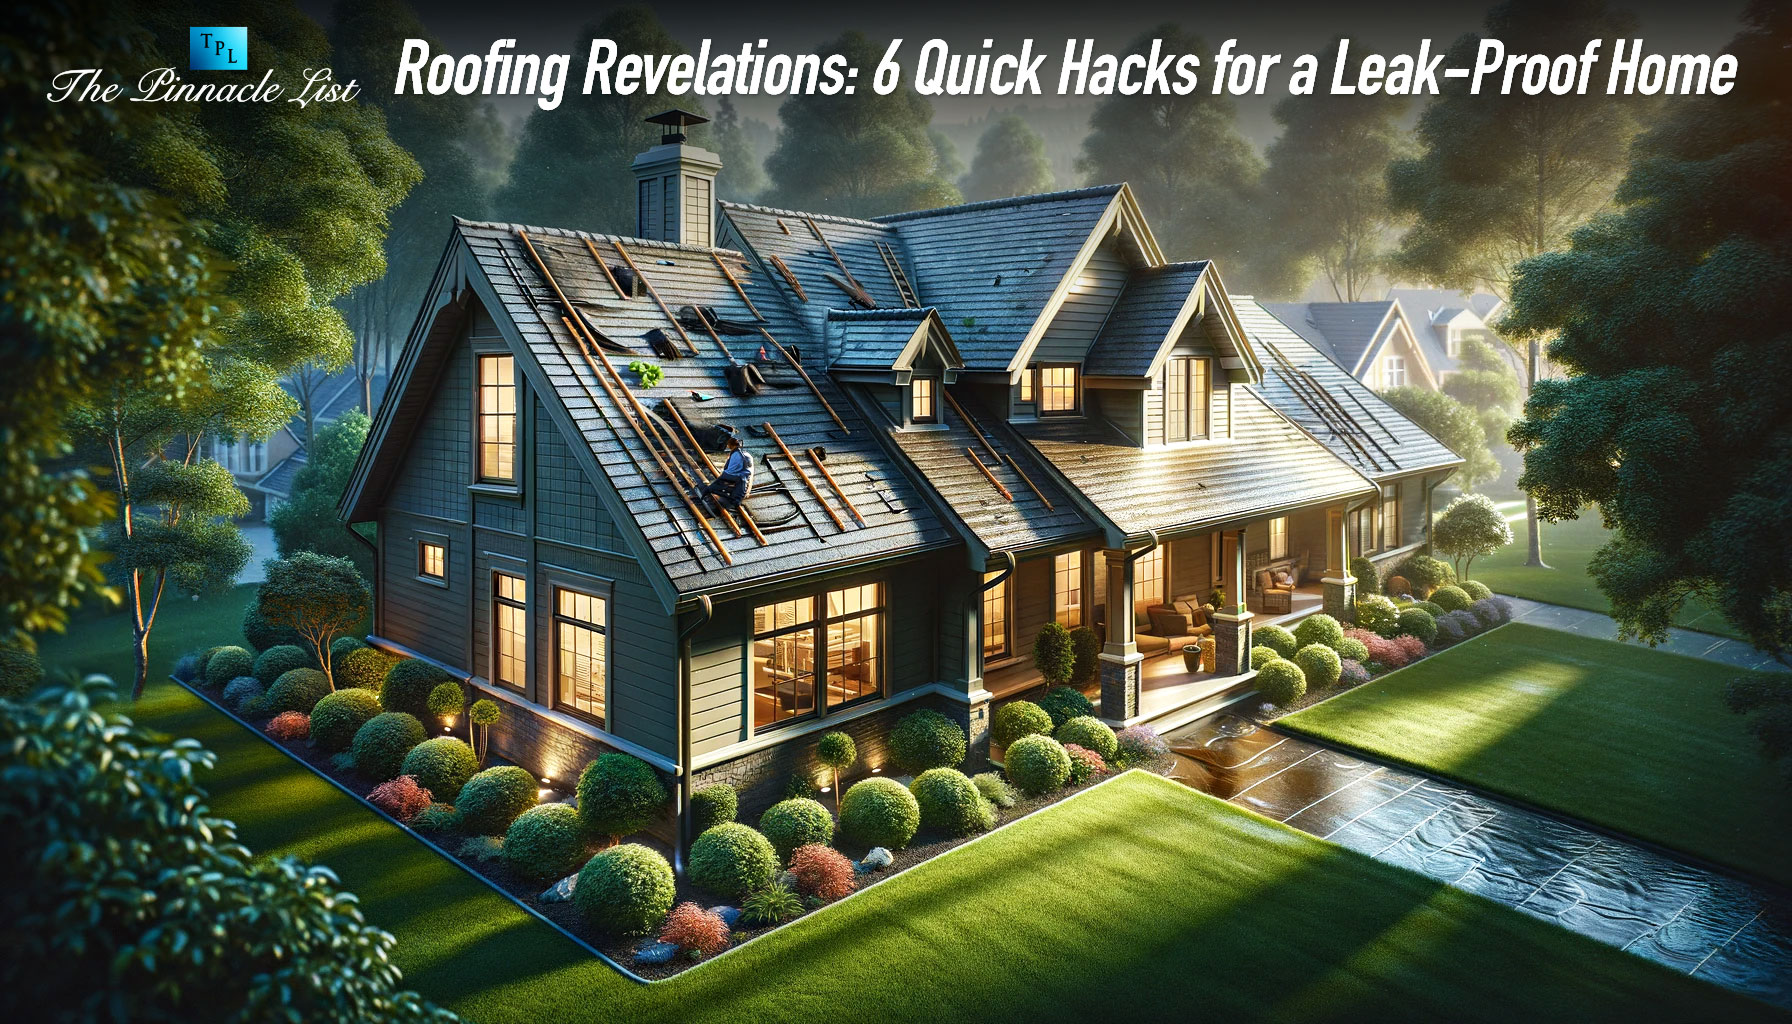 Roofing Revelations: 6 Quick Hacks for a Leak-Proof Home